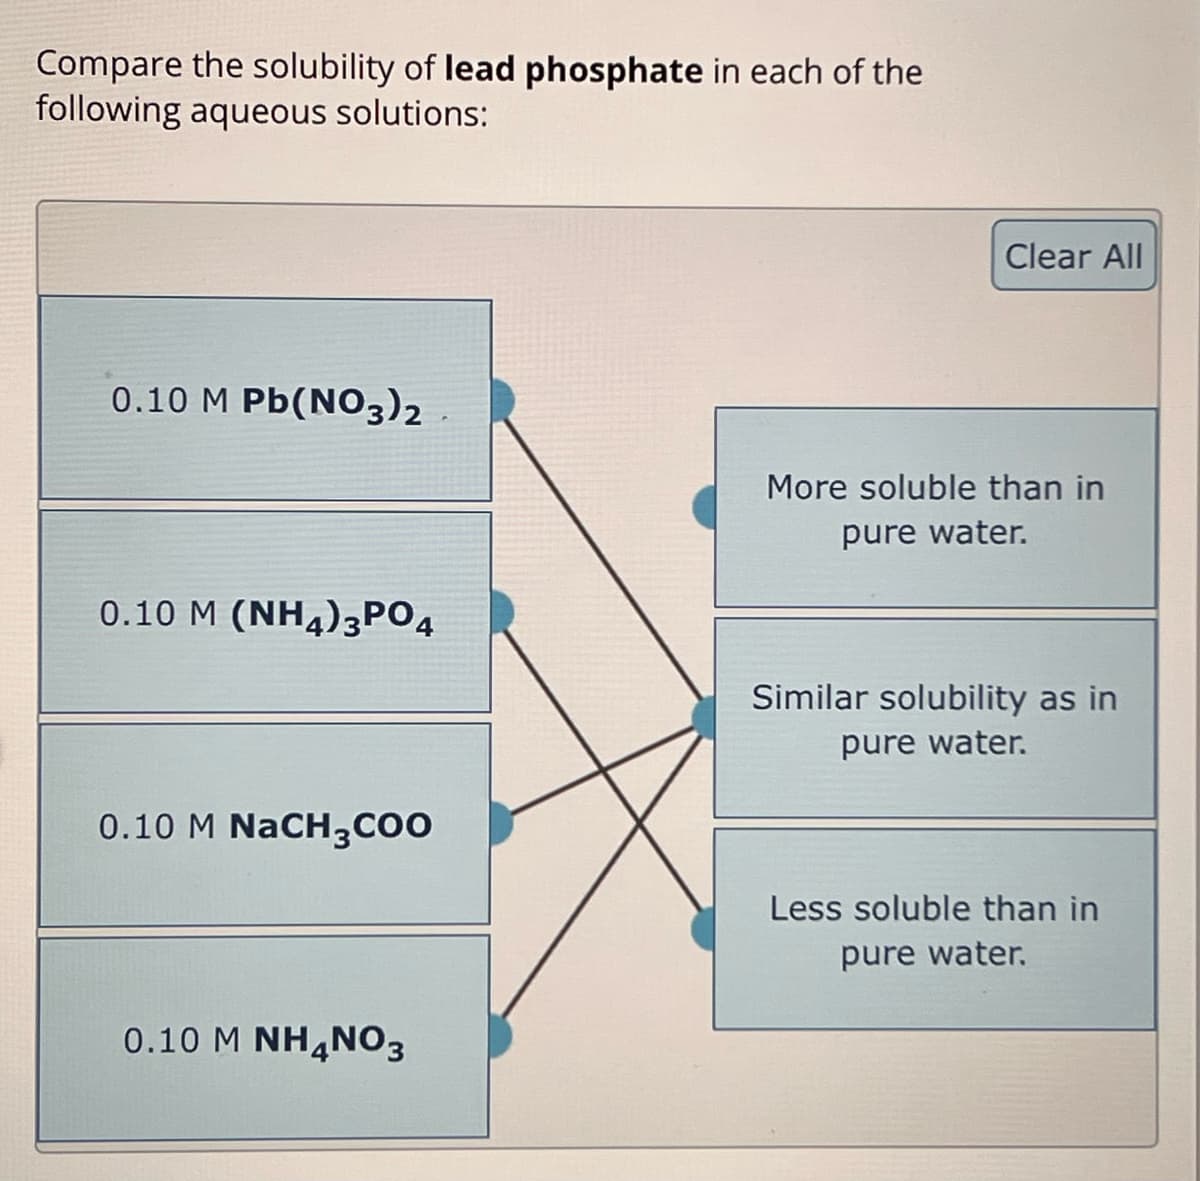 Compare the solubility of lead phosphate in each of the
following aqueous solutions:
Clear All
0.10 M Pb(NO3)2
More soluble than in
pure water.
0.10 M (NH4)3PO4
Similar solubility as in
pure water.
0.10 M NaCH3COO
Less soluble than in
0.10 M NH4NO3
pure water.